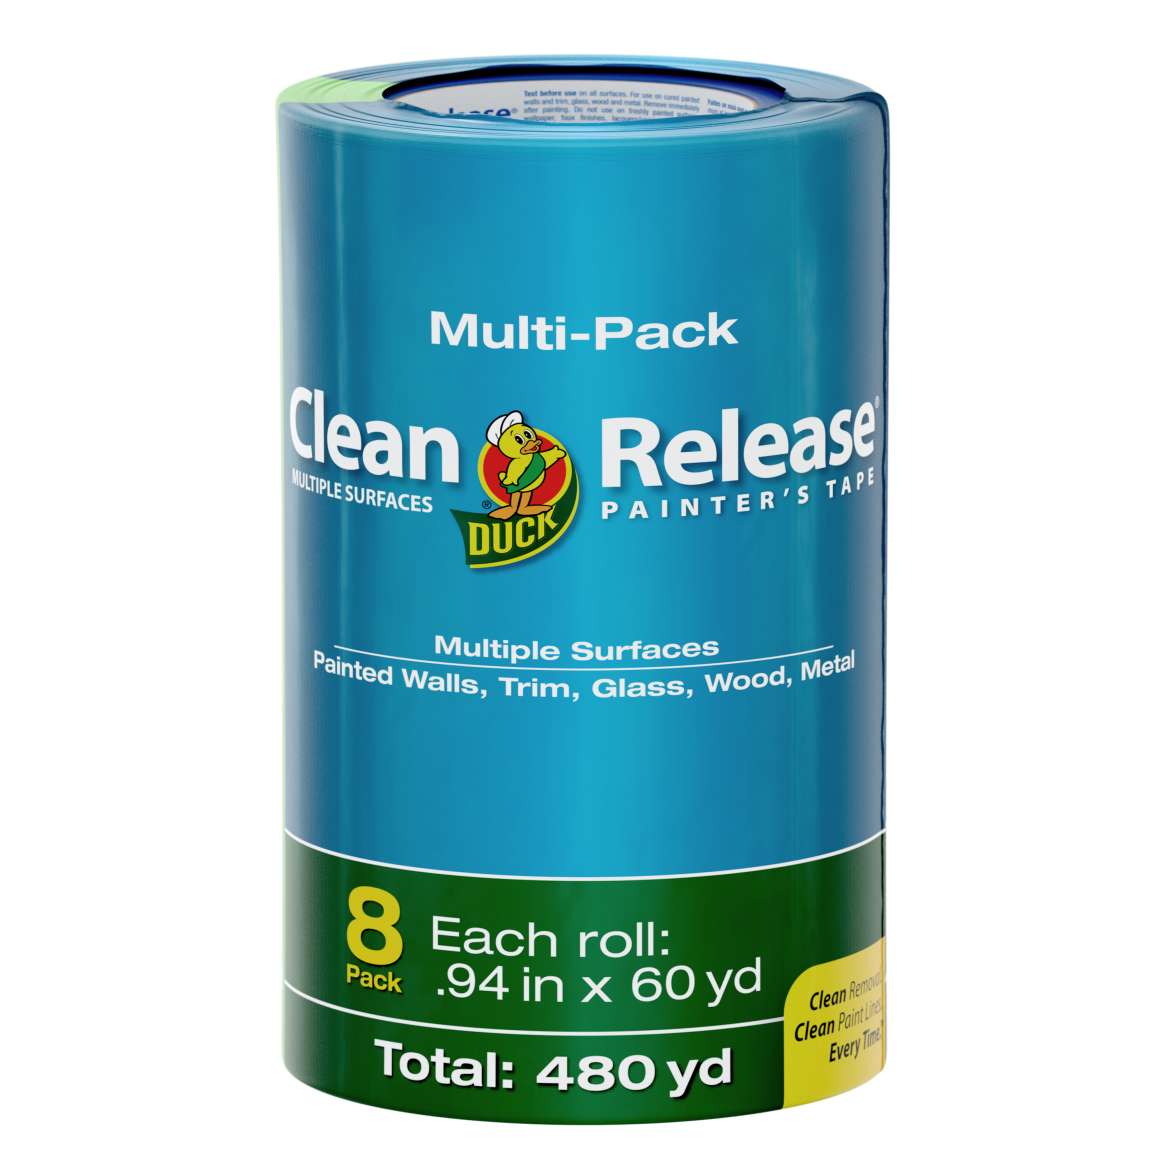 Clean Release® Painter's Tape Image